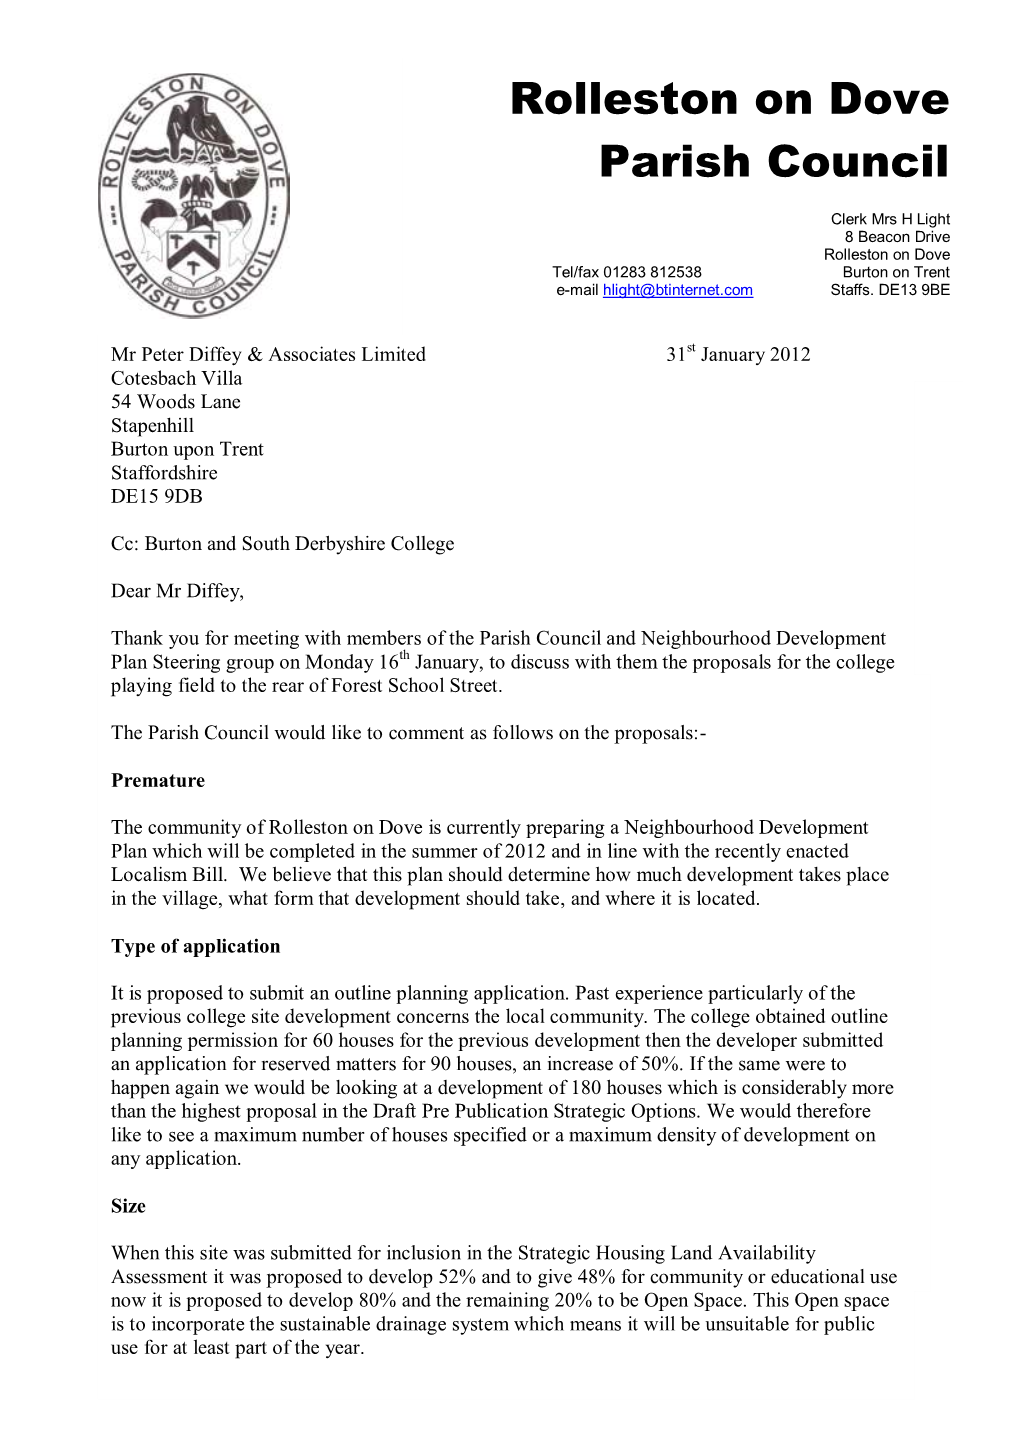 Parish Council Letter to Peter Diffey